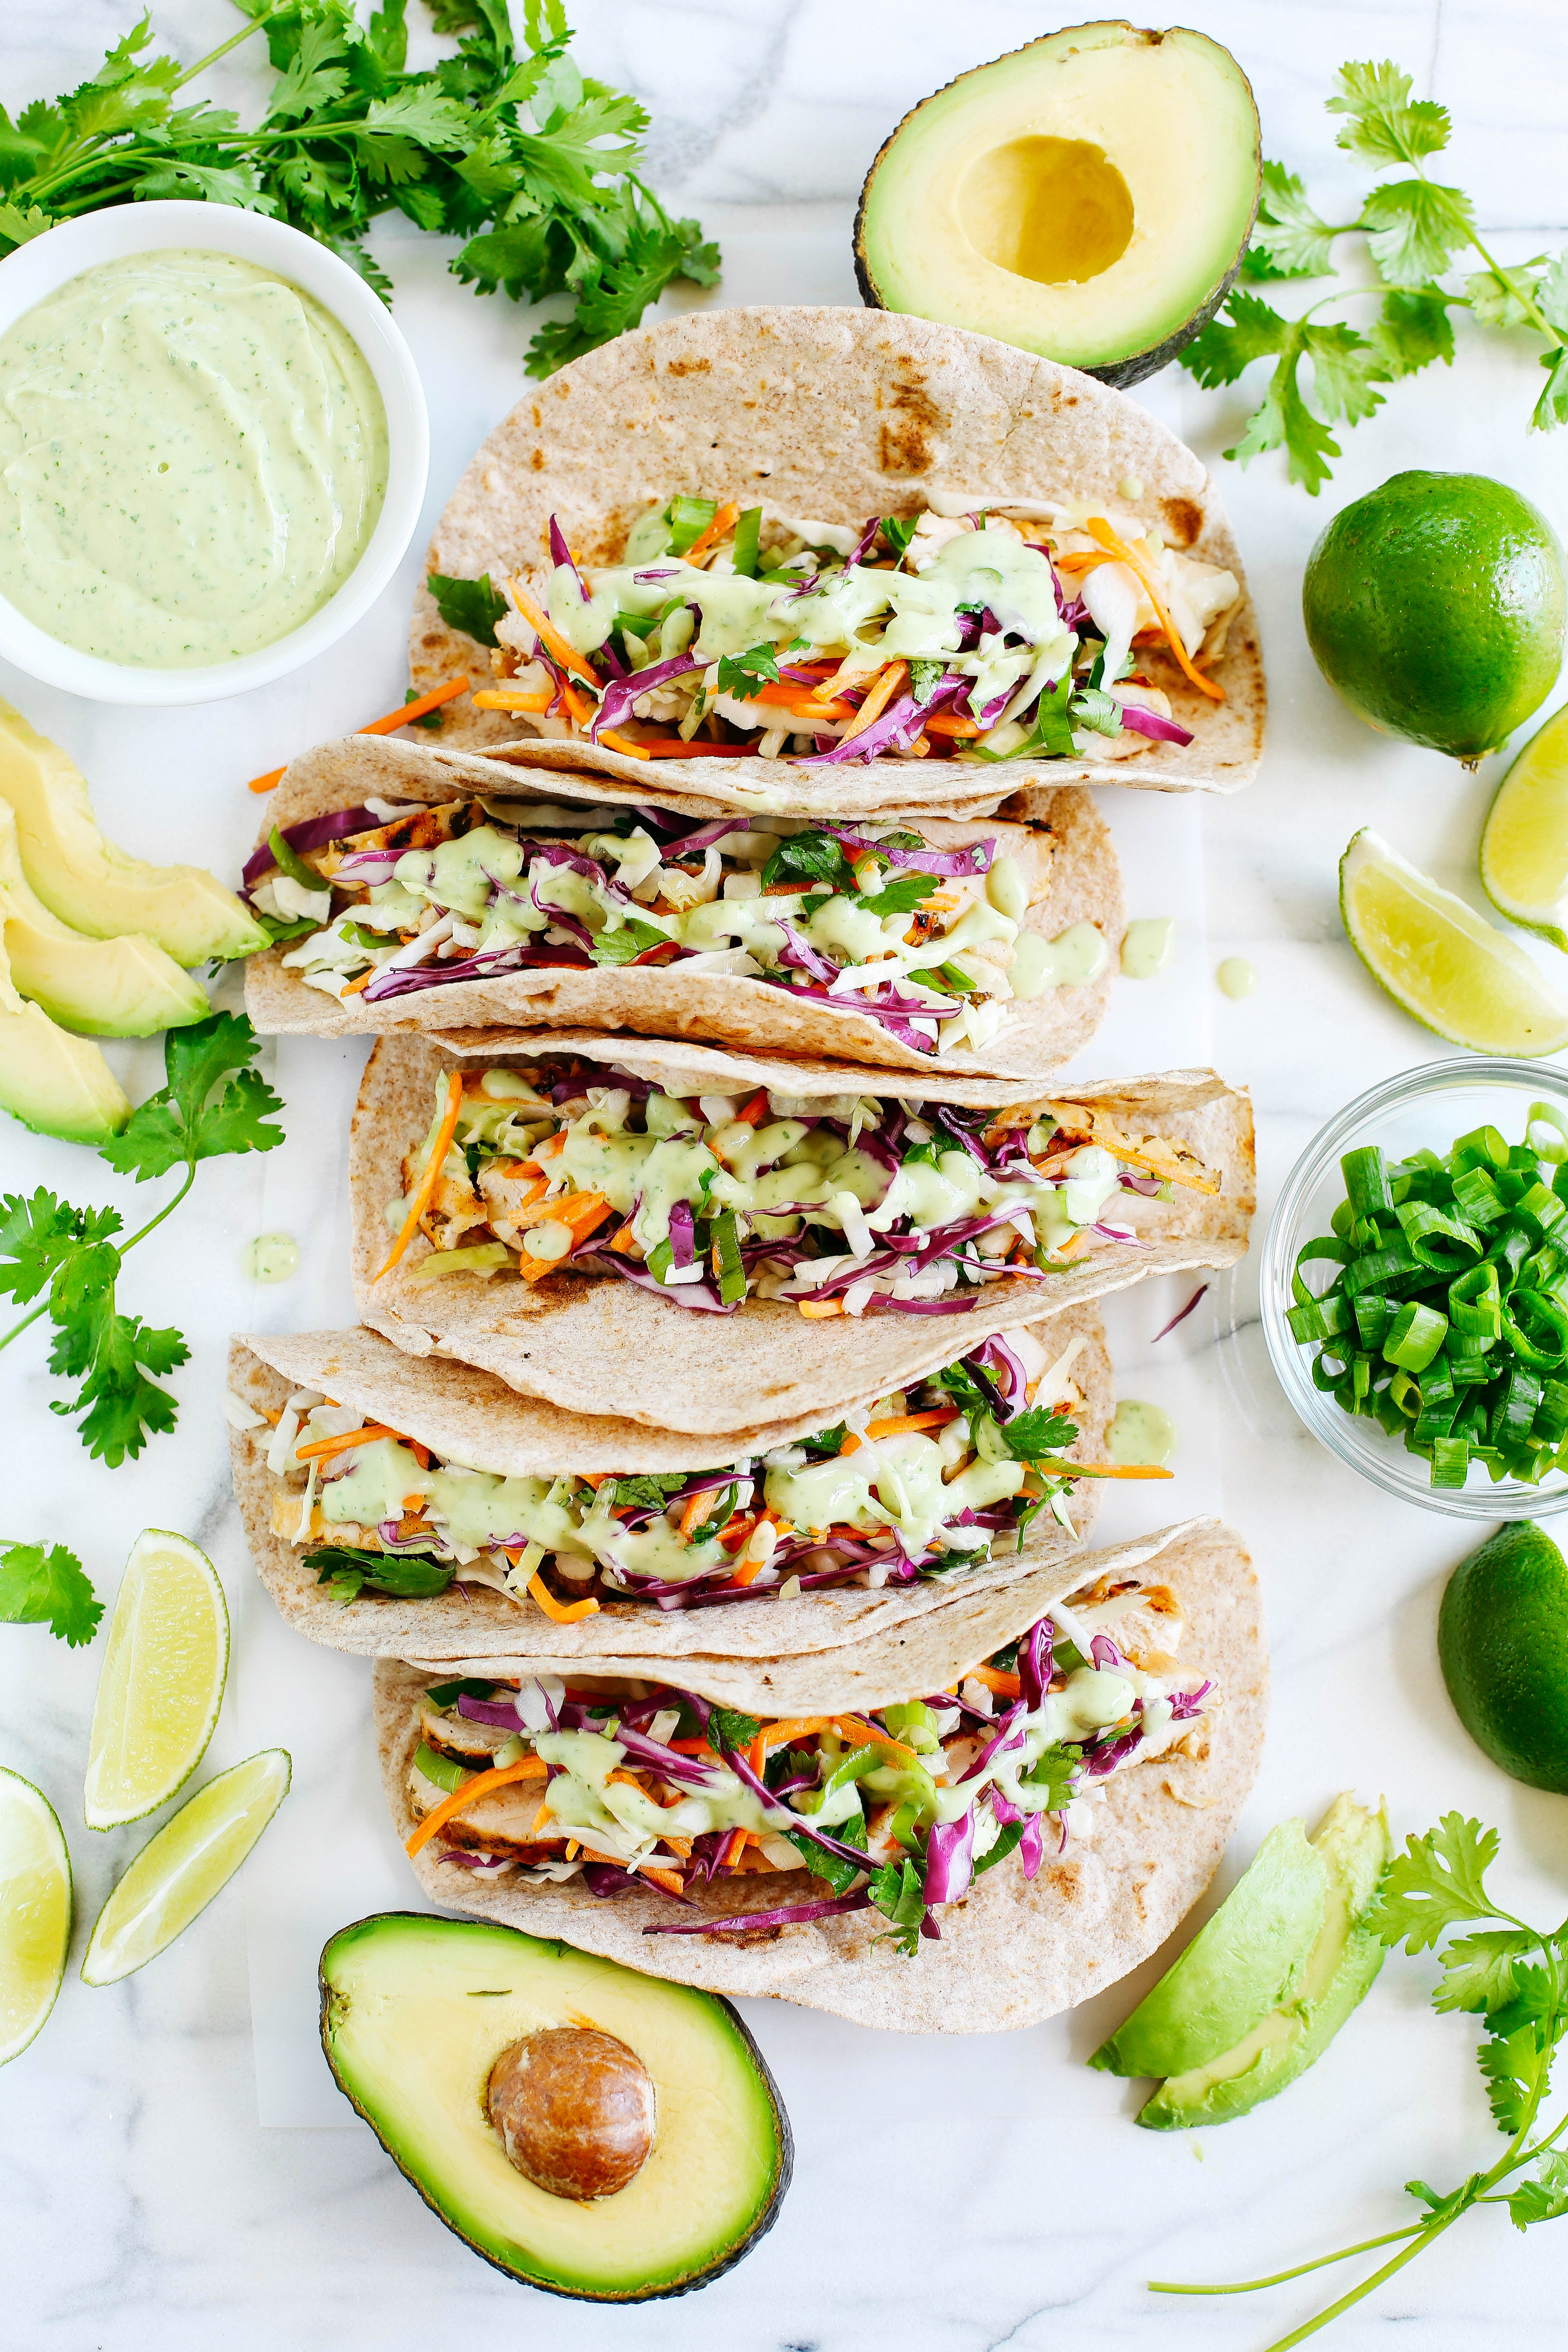 These Cilantro Lime Chicken Tacos with tangy coleslaw and avocado crema are simple, fresh and delicious making this the perfect EASY summer recipe!